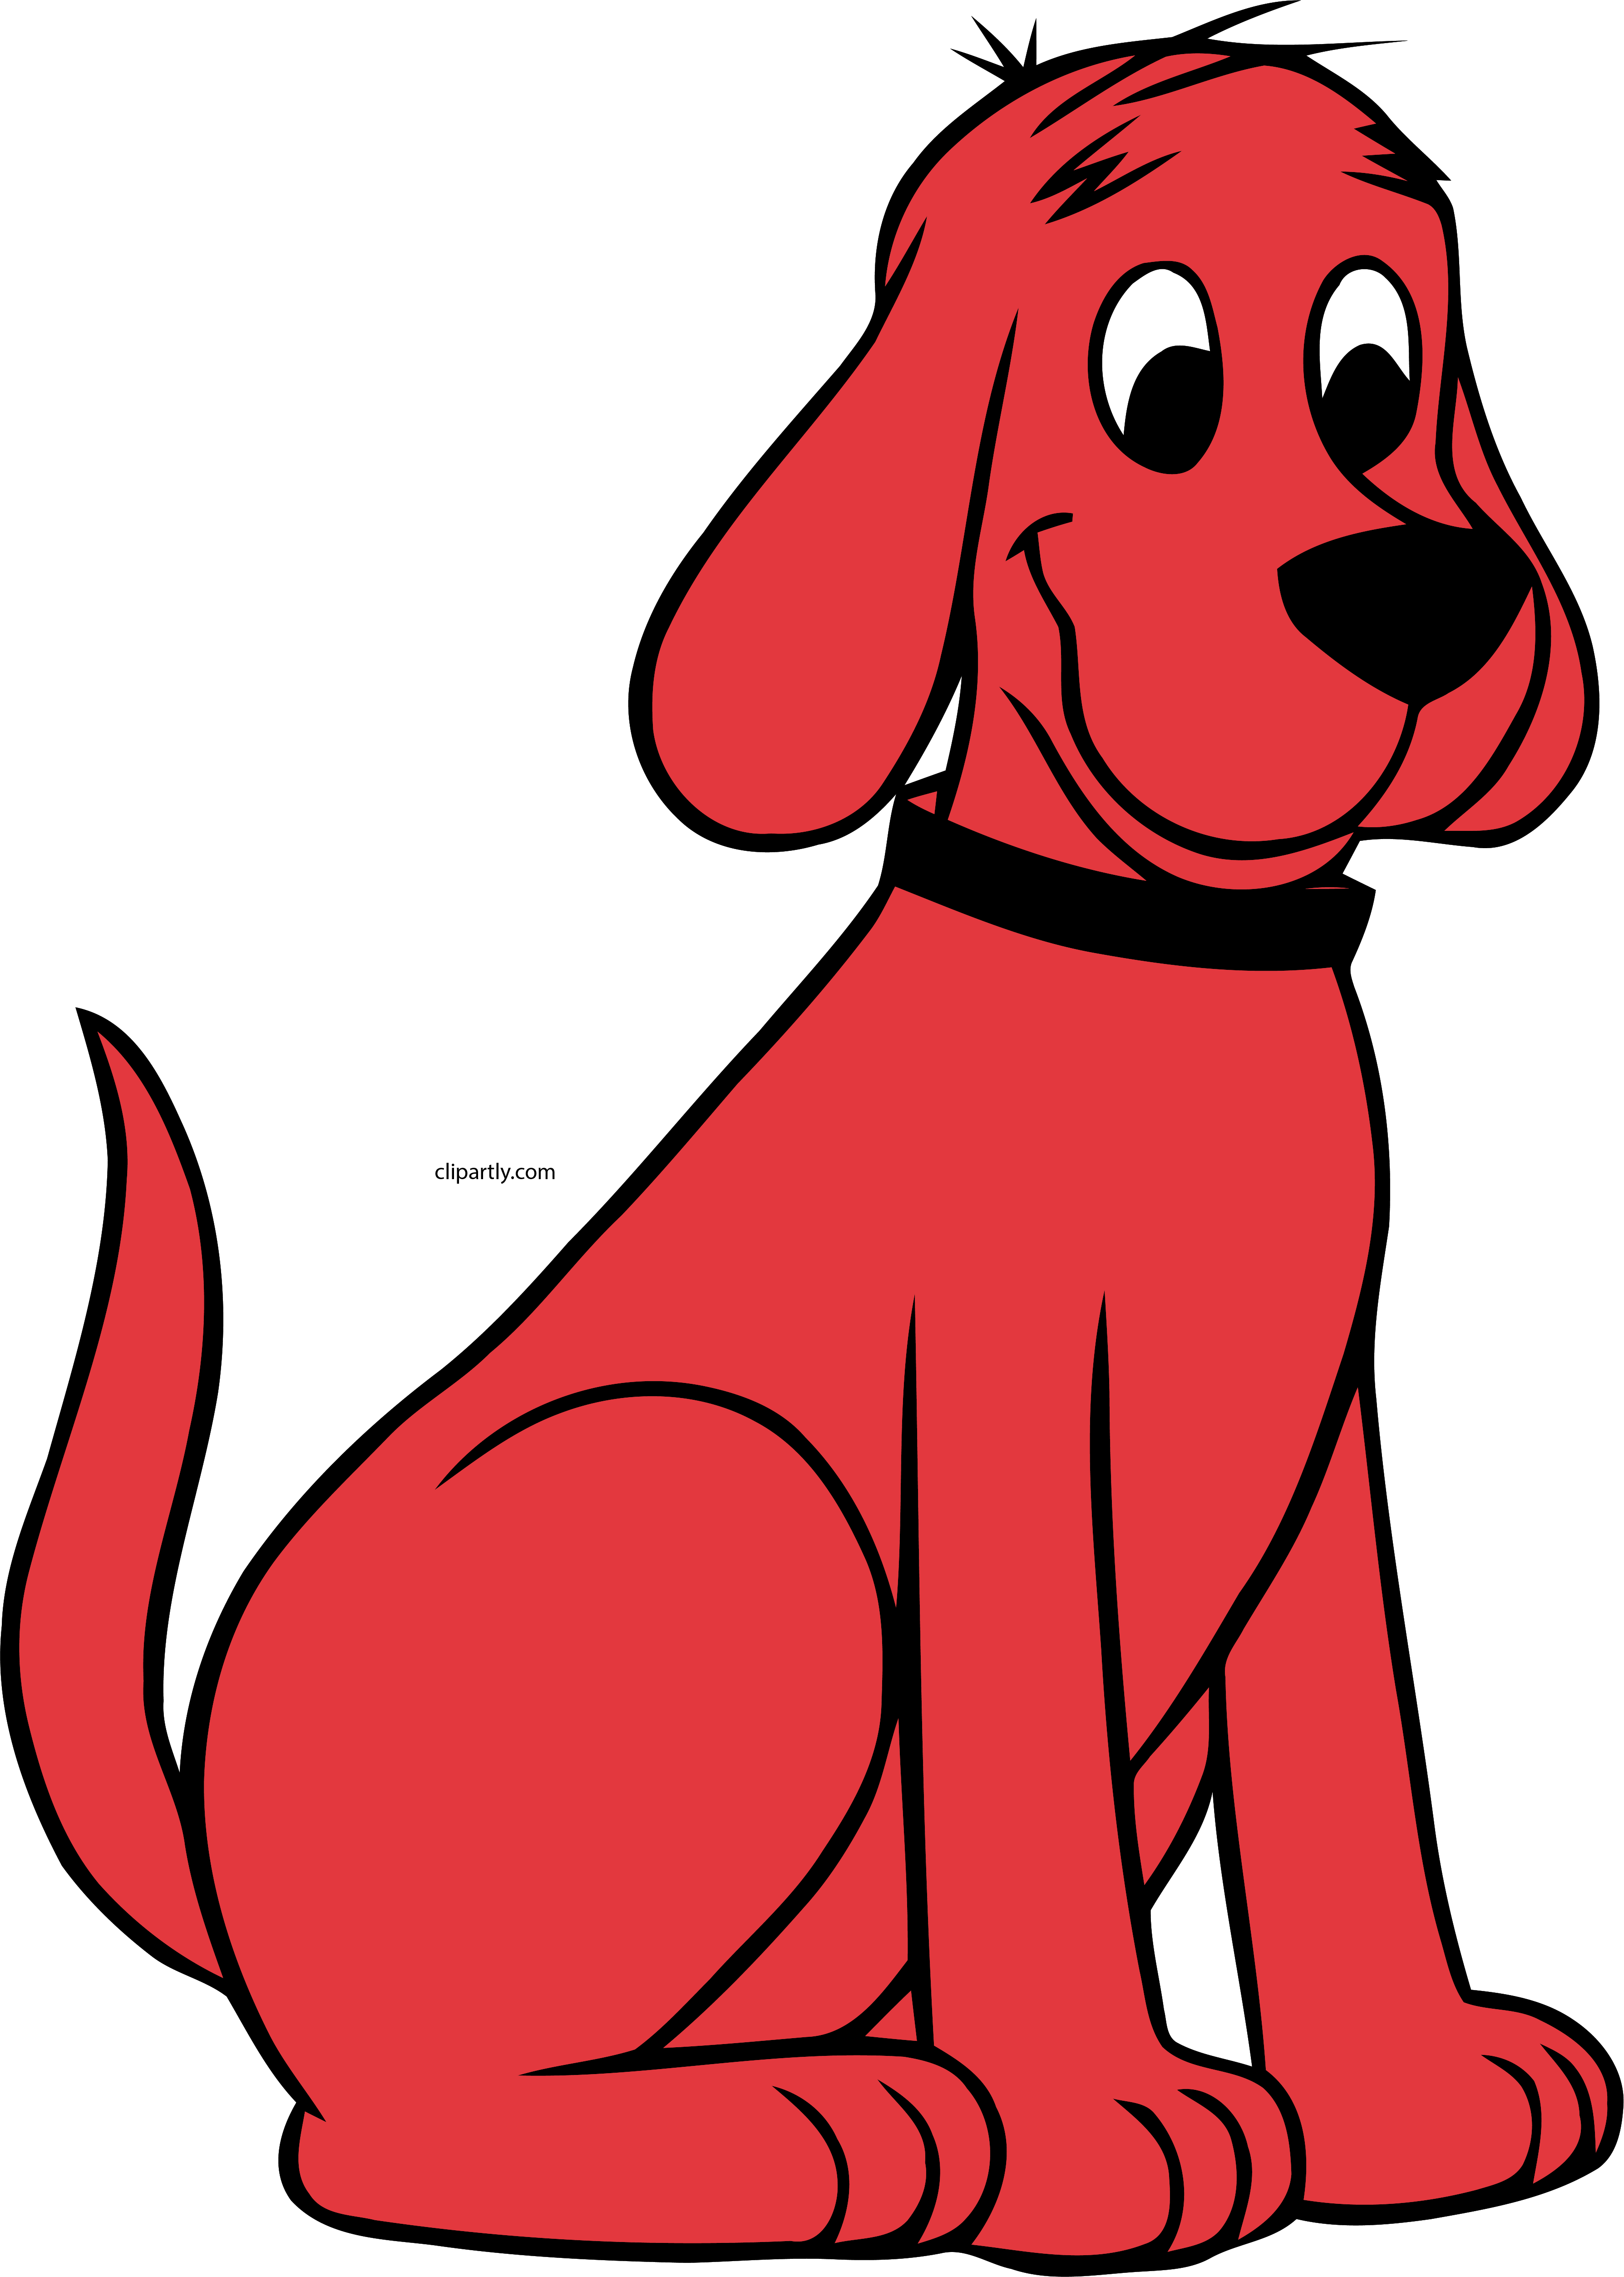 A Cartoon Dog With A Black Background PNG